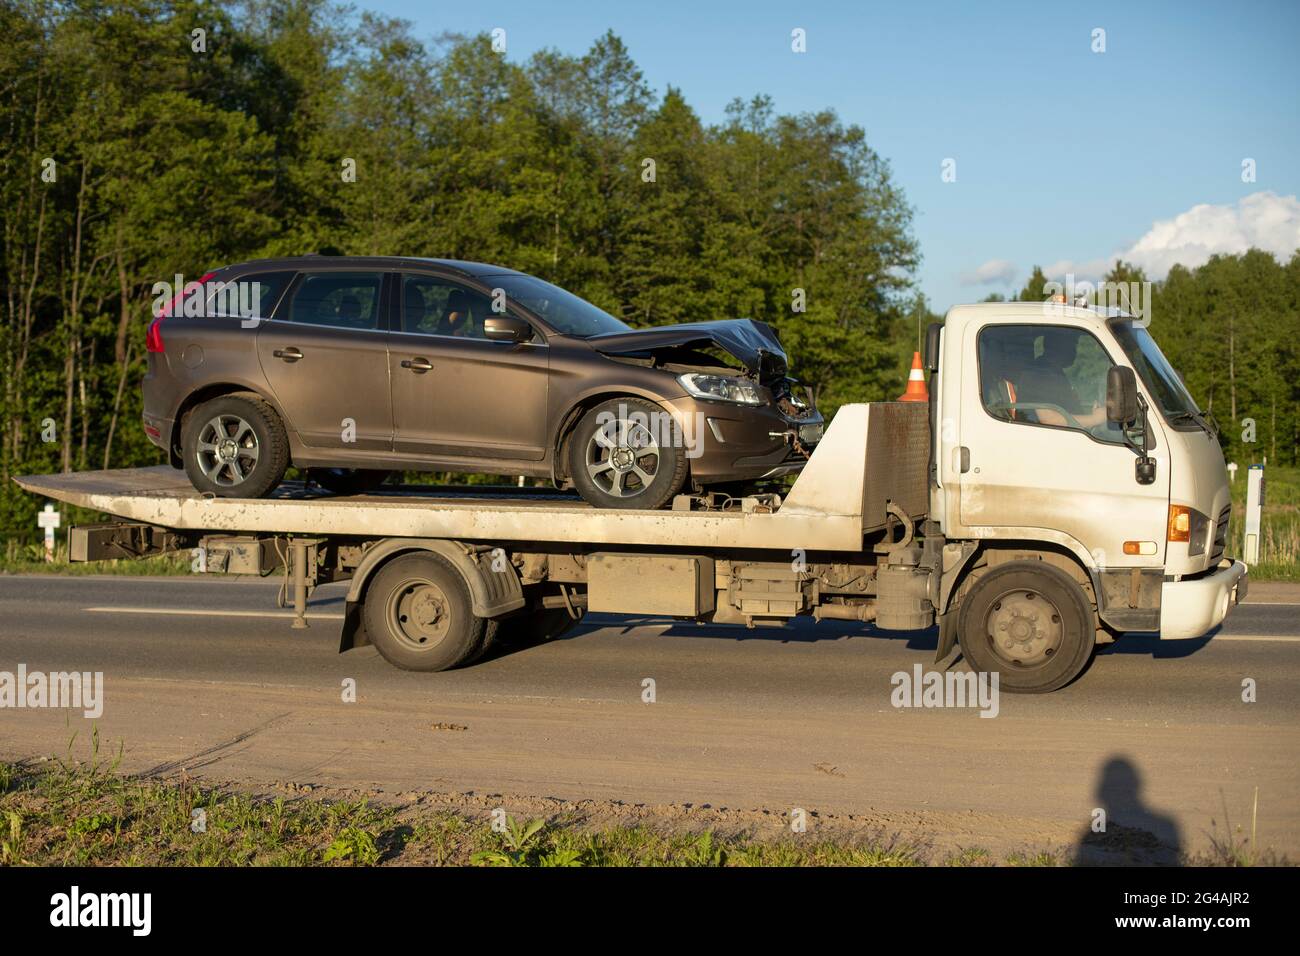 A tow truck is driving a car after an accident. Car transportation on a cargo platform. The loader takes away the emergency vehicle. Stock Photo